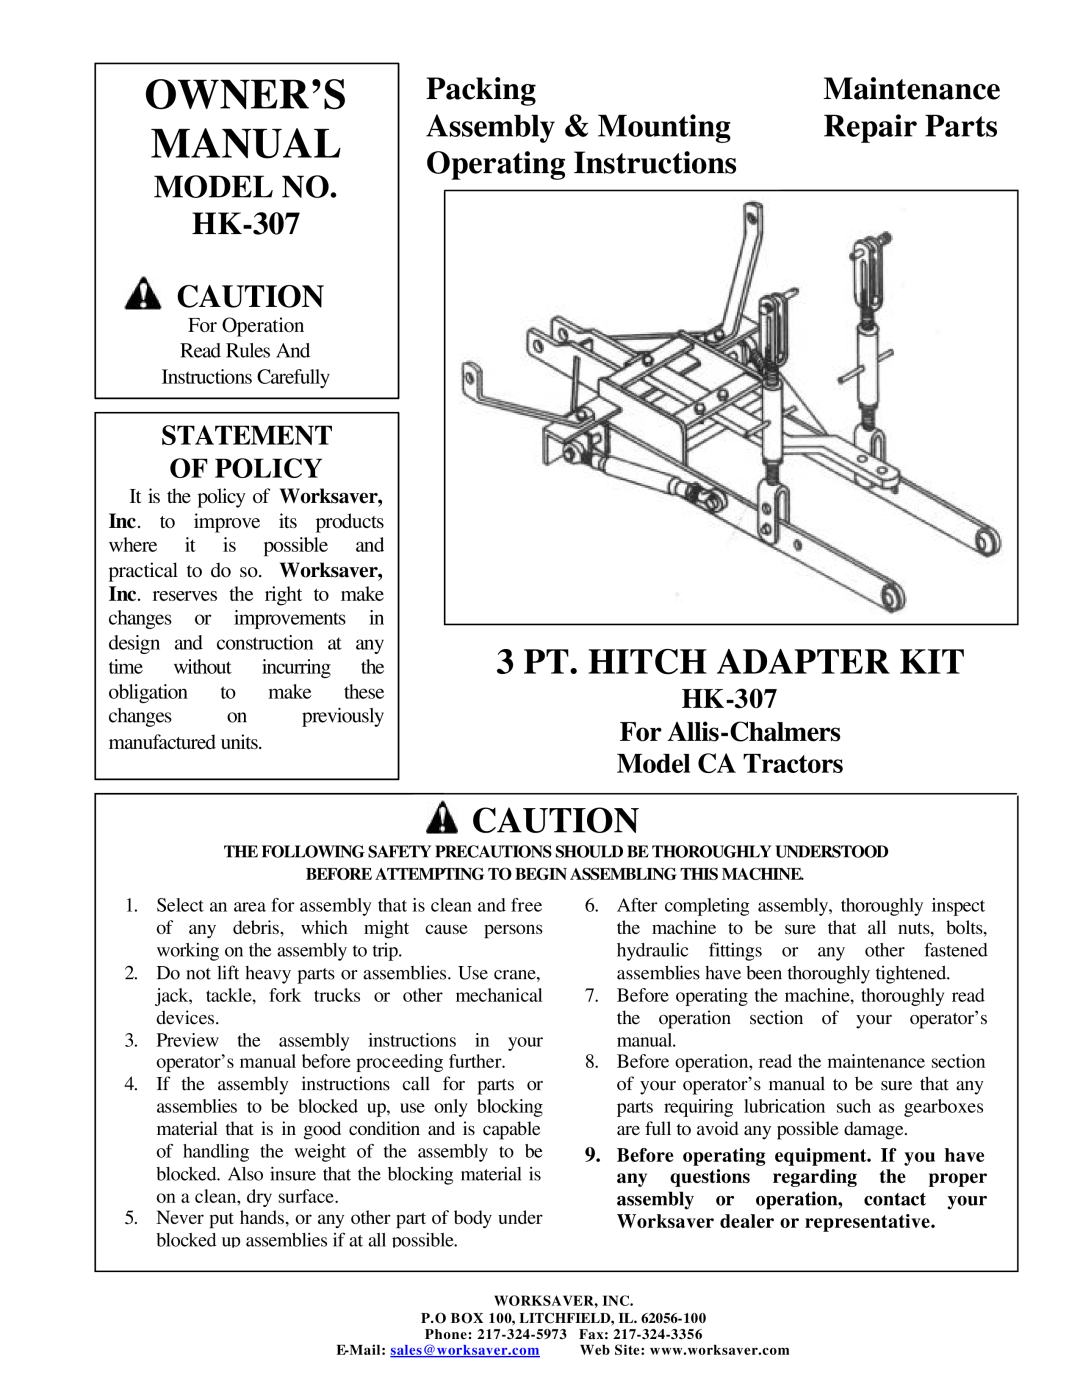 Worksaver owner manual MODEL NO HK-307, Packing, Maintenance, Assembly & Mounting, Repair Parts, Operating Instructions 